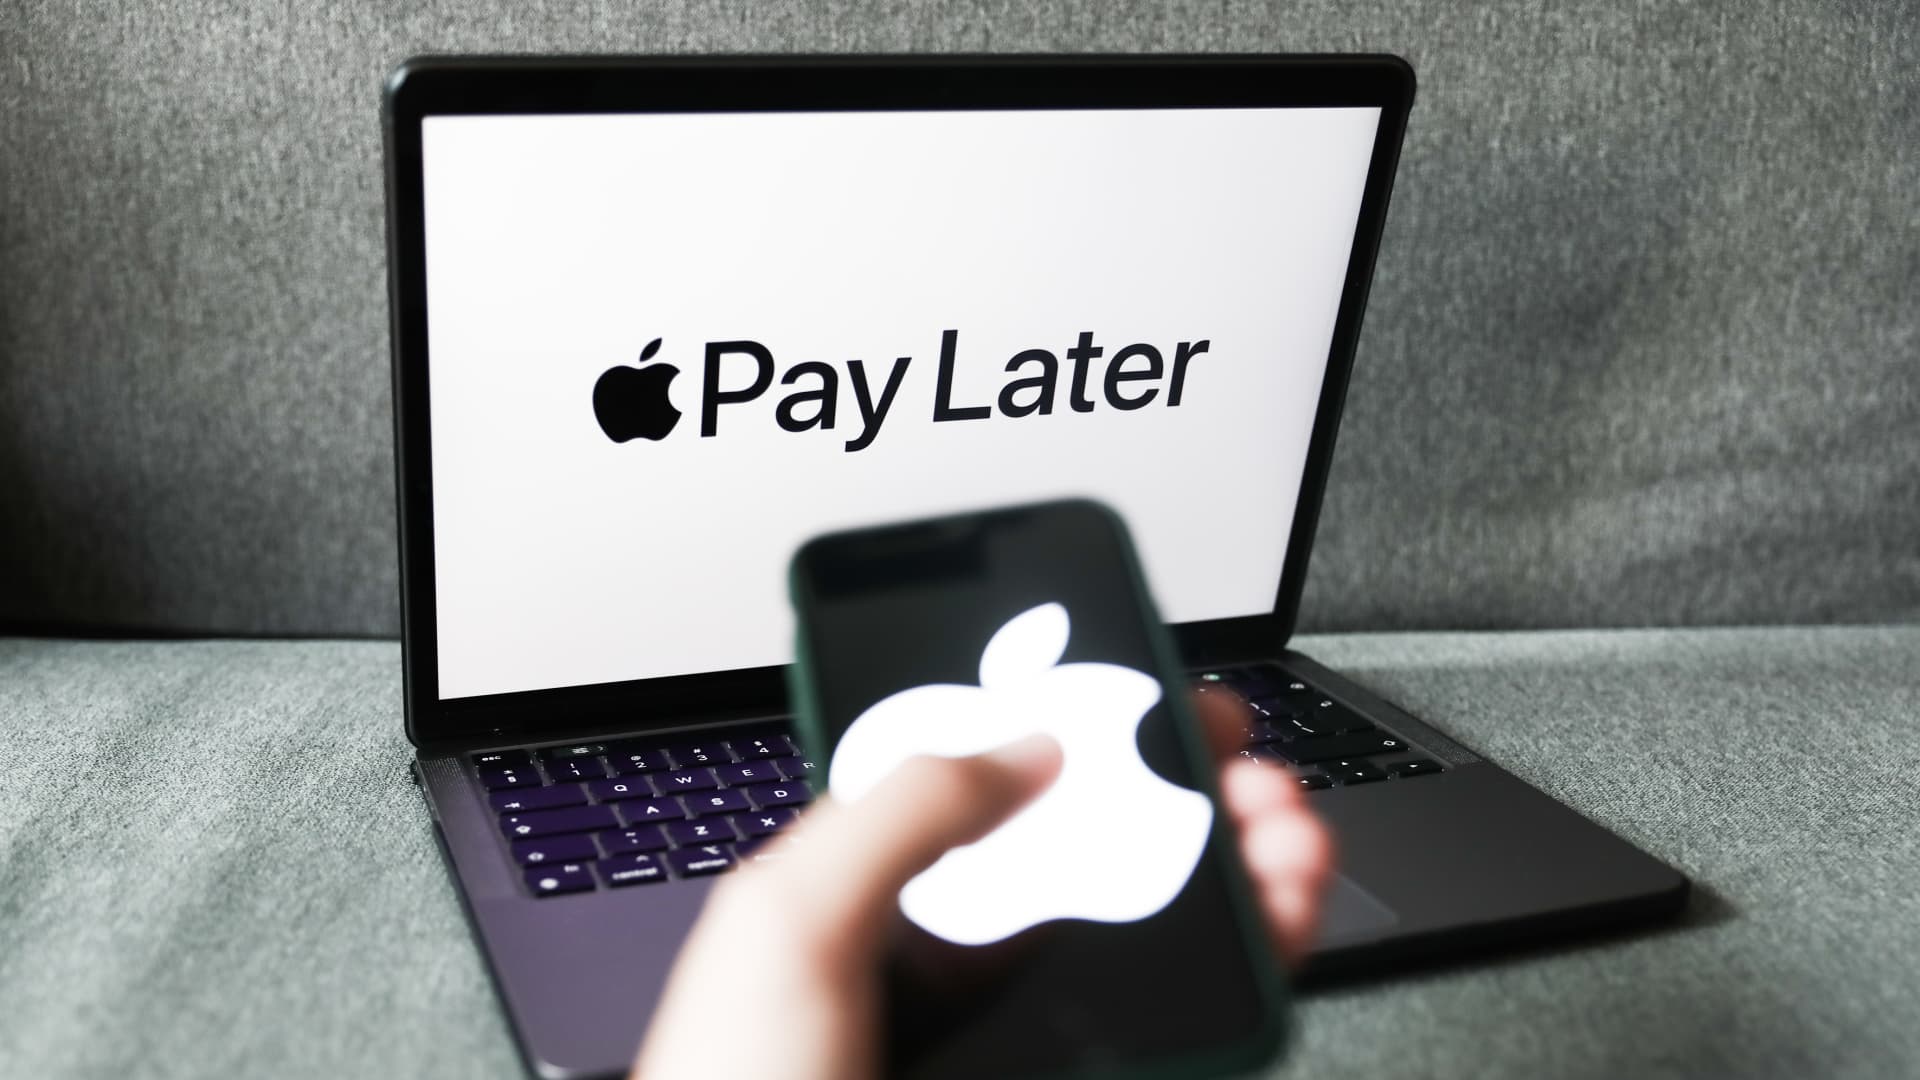 Apple’s newest fintech transfer has purchase now, pay later business on edge